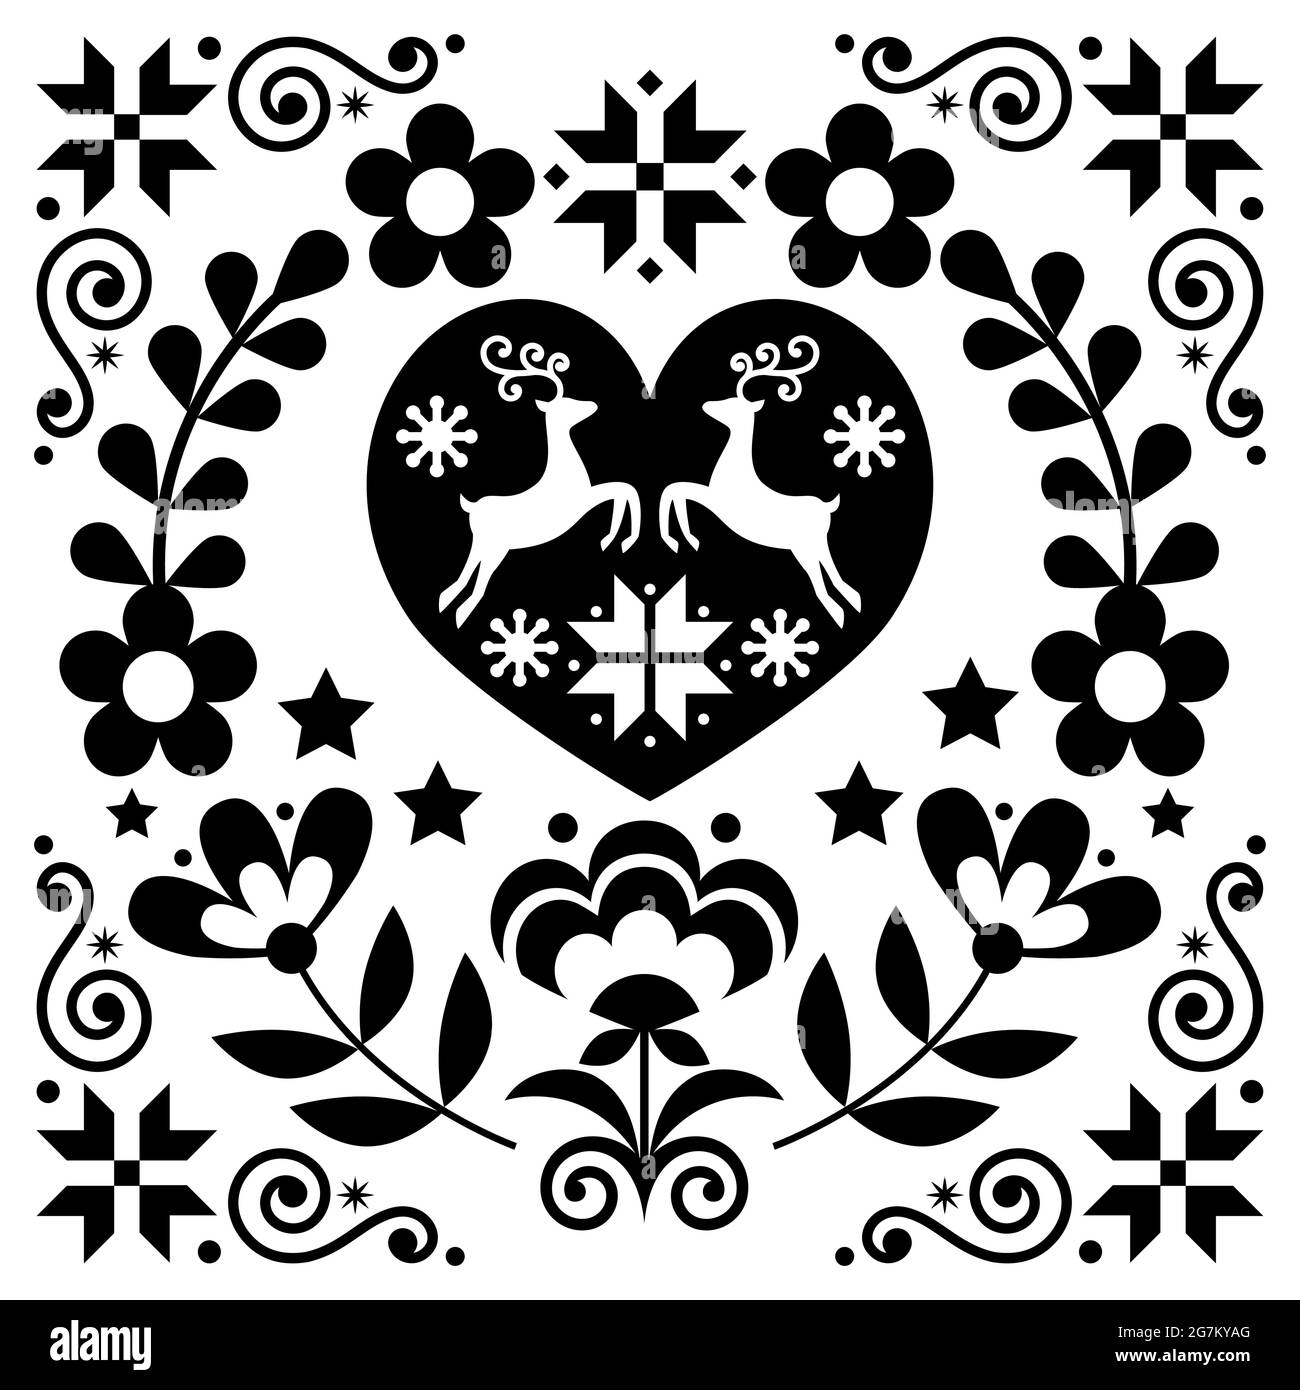 Christmas Scandinavian vector greeting card pattern in black and white - folk art style with reindeer, Xmas trees and flowers Stock Vector